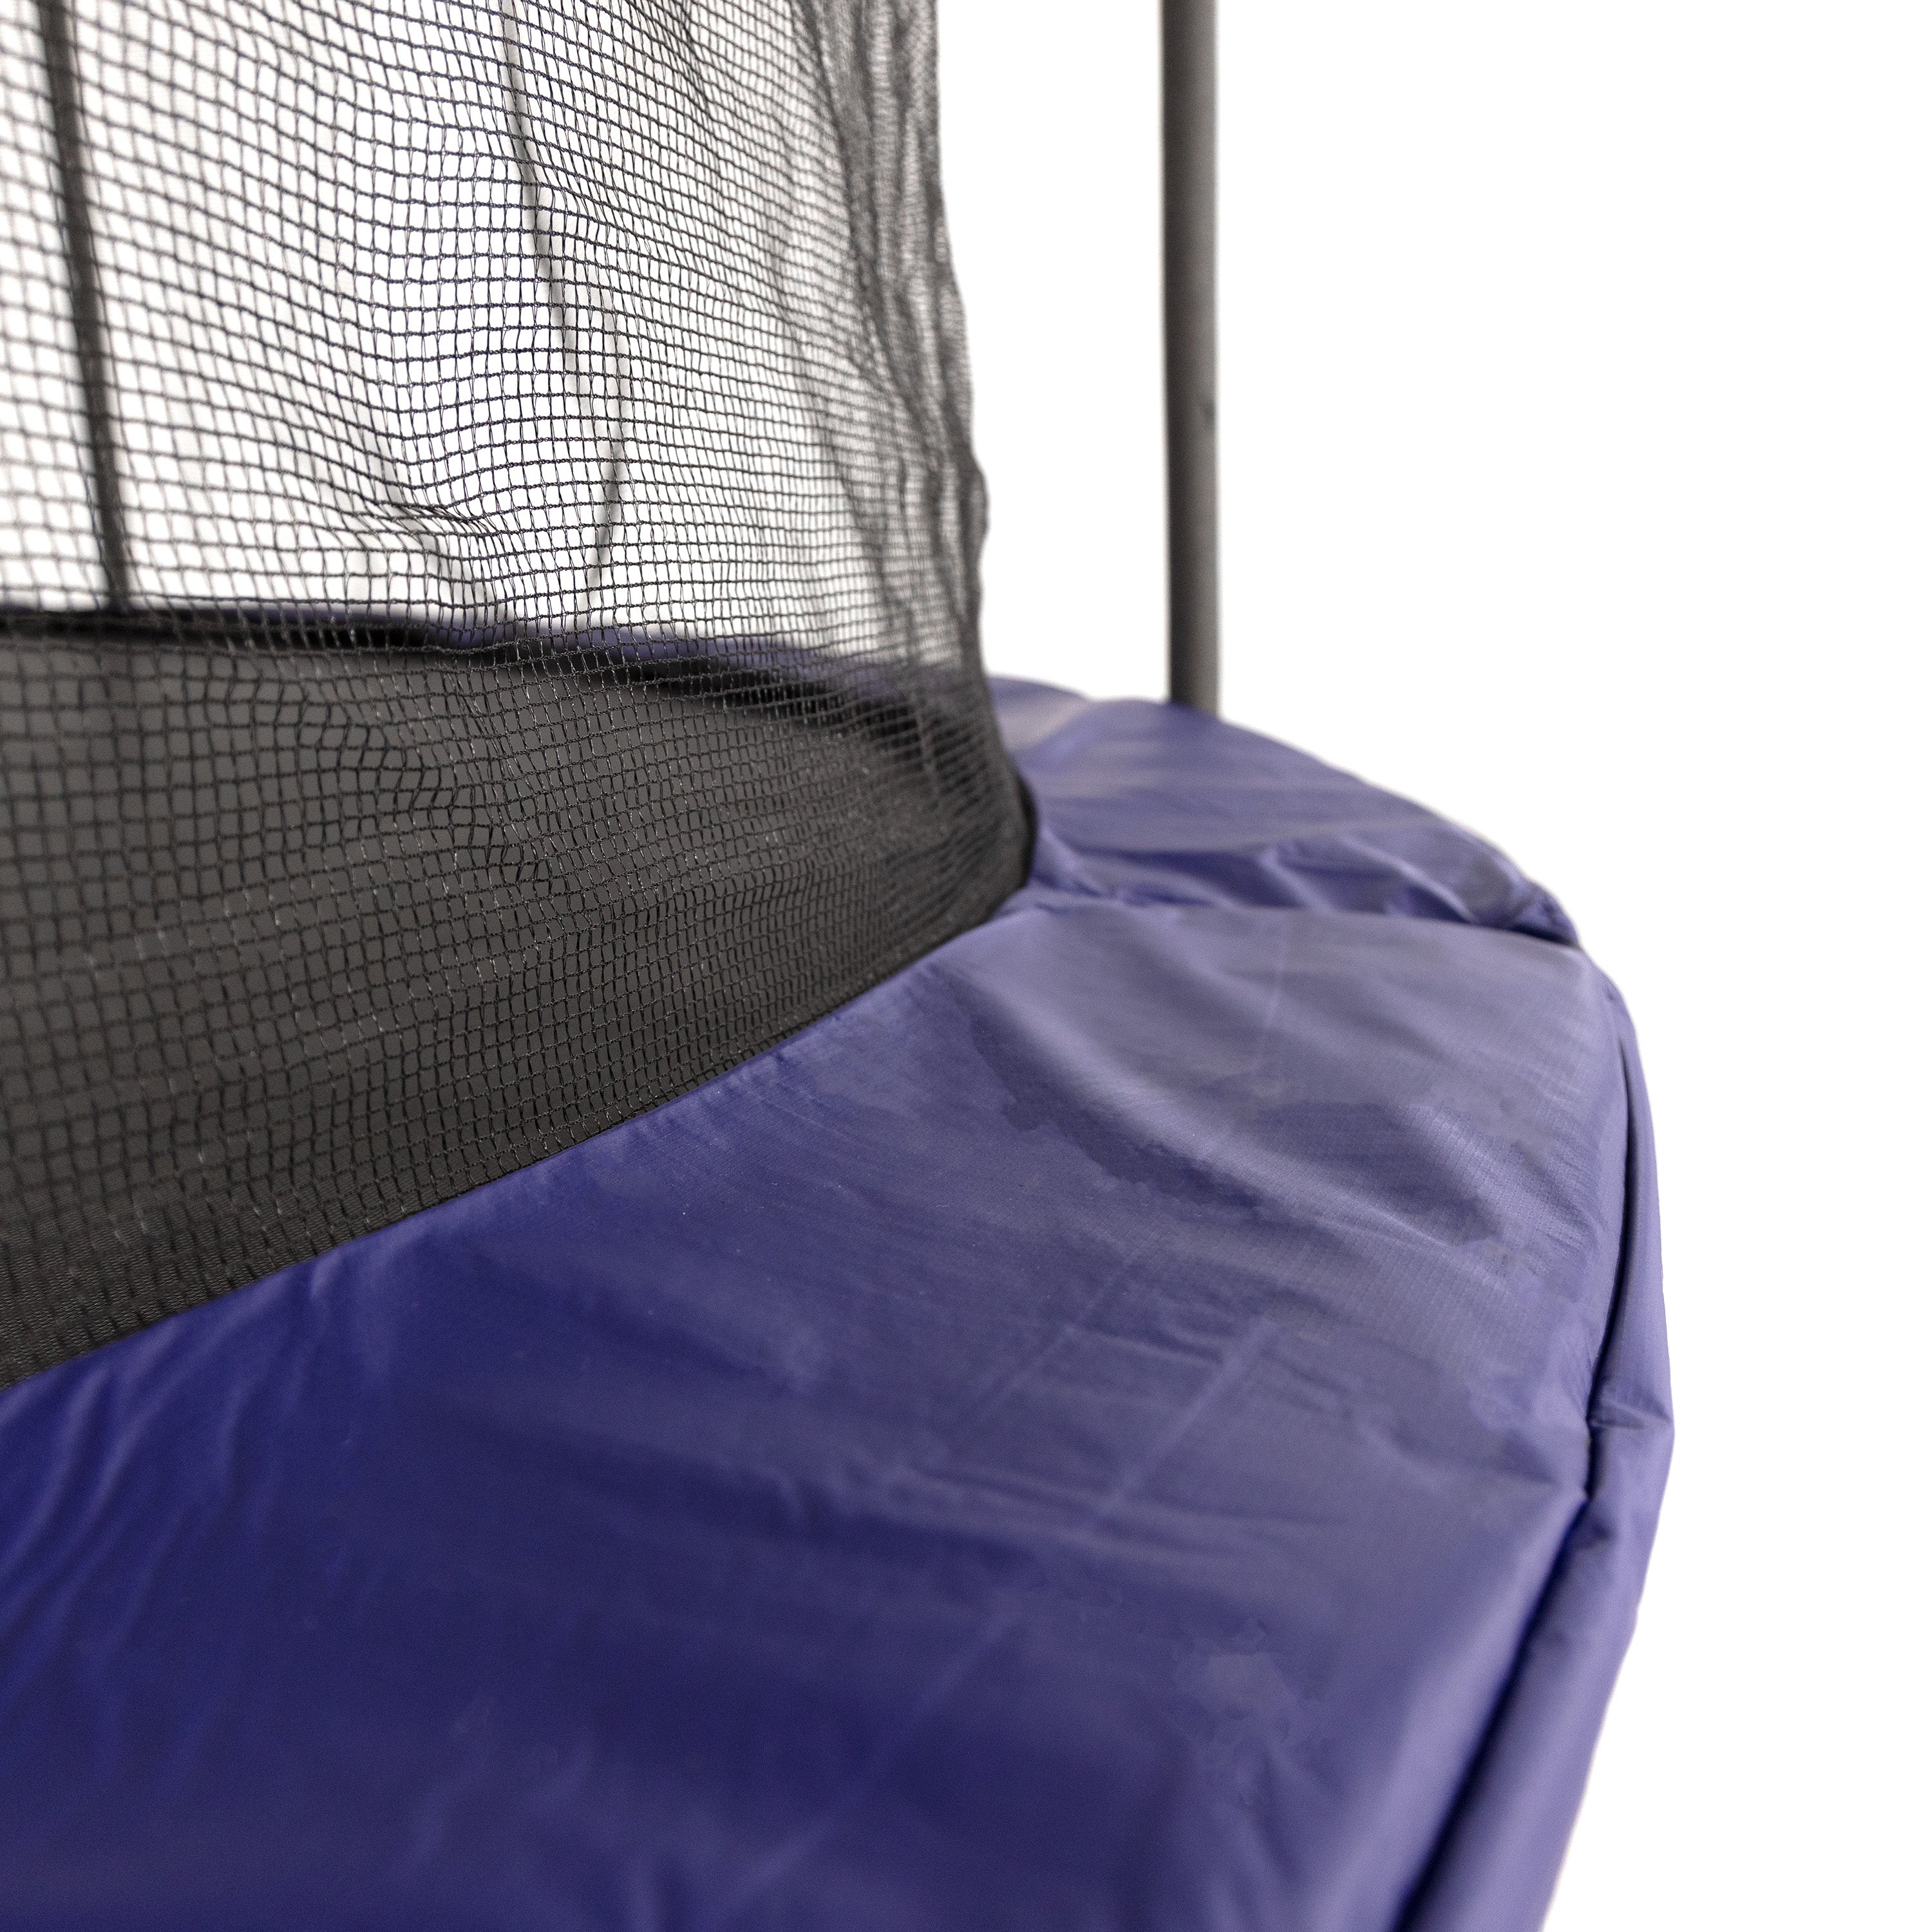 Vinyl-coated blue spring pad connected to black enclosure net and foam padded poles.